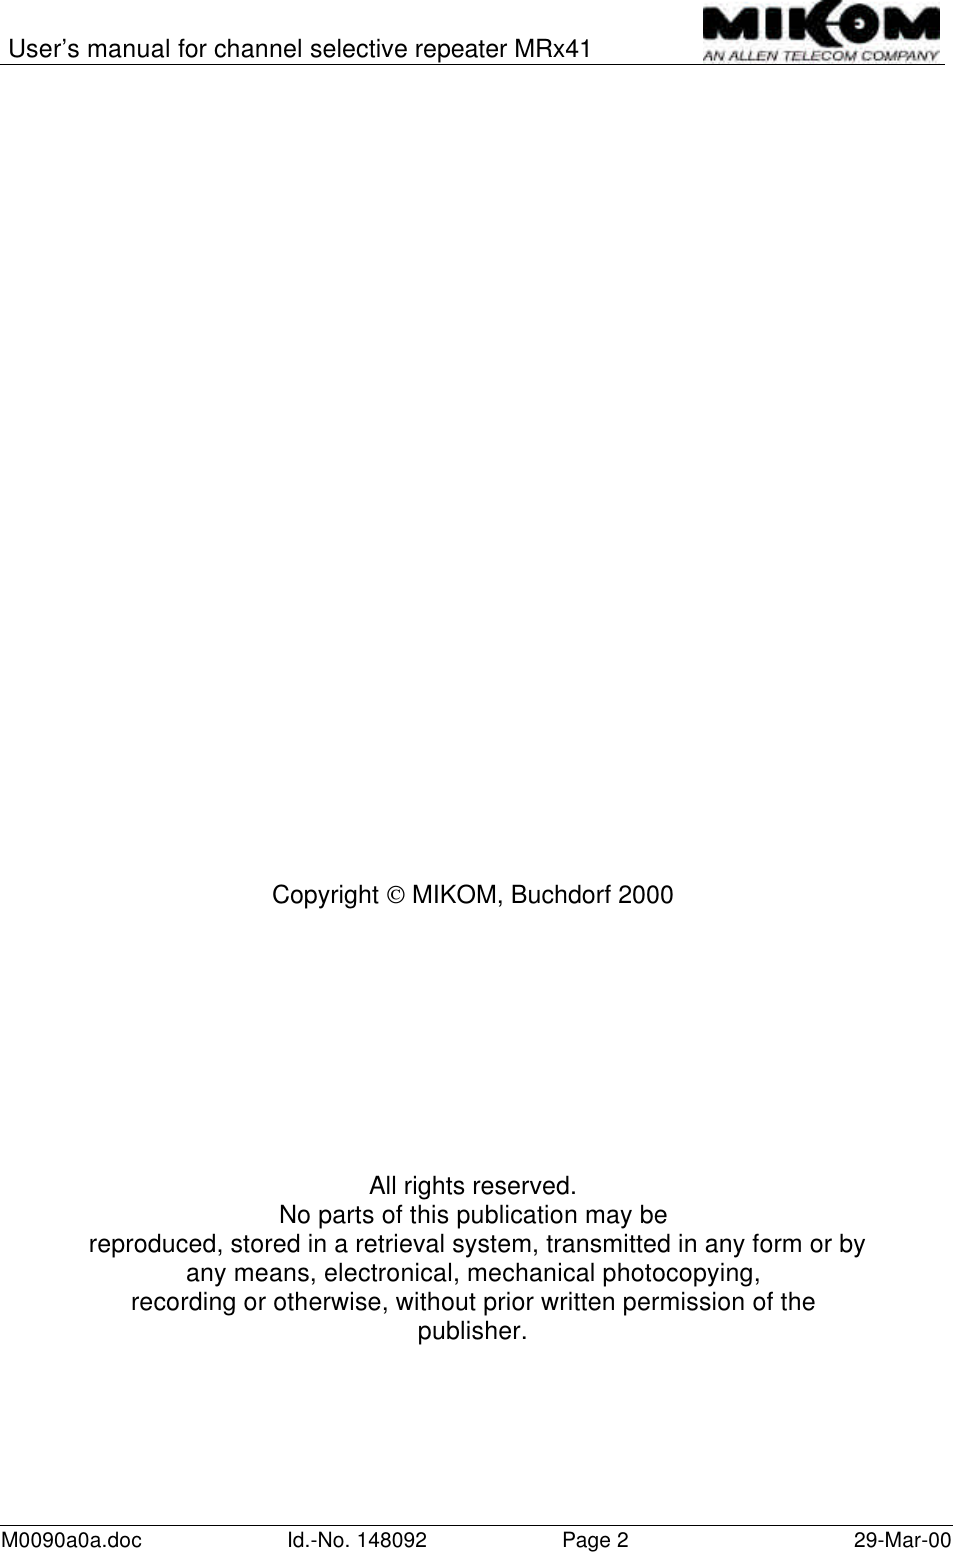 User’s manual for channel selective repeater MRx41M0090a0a.doc Id.-No. 148092 Page 229-Mar-00Copyright  MIKOM, Buchdorf 2000All rights reserved.No parts of this publication may be reproduced, stored in a retrieval system, transmitted in any form or byany means, electronical, mechanical photocopying,recording or otherwise, without prior written permission of thepublisher.